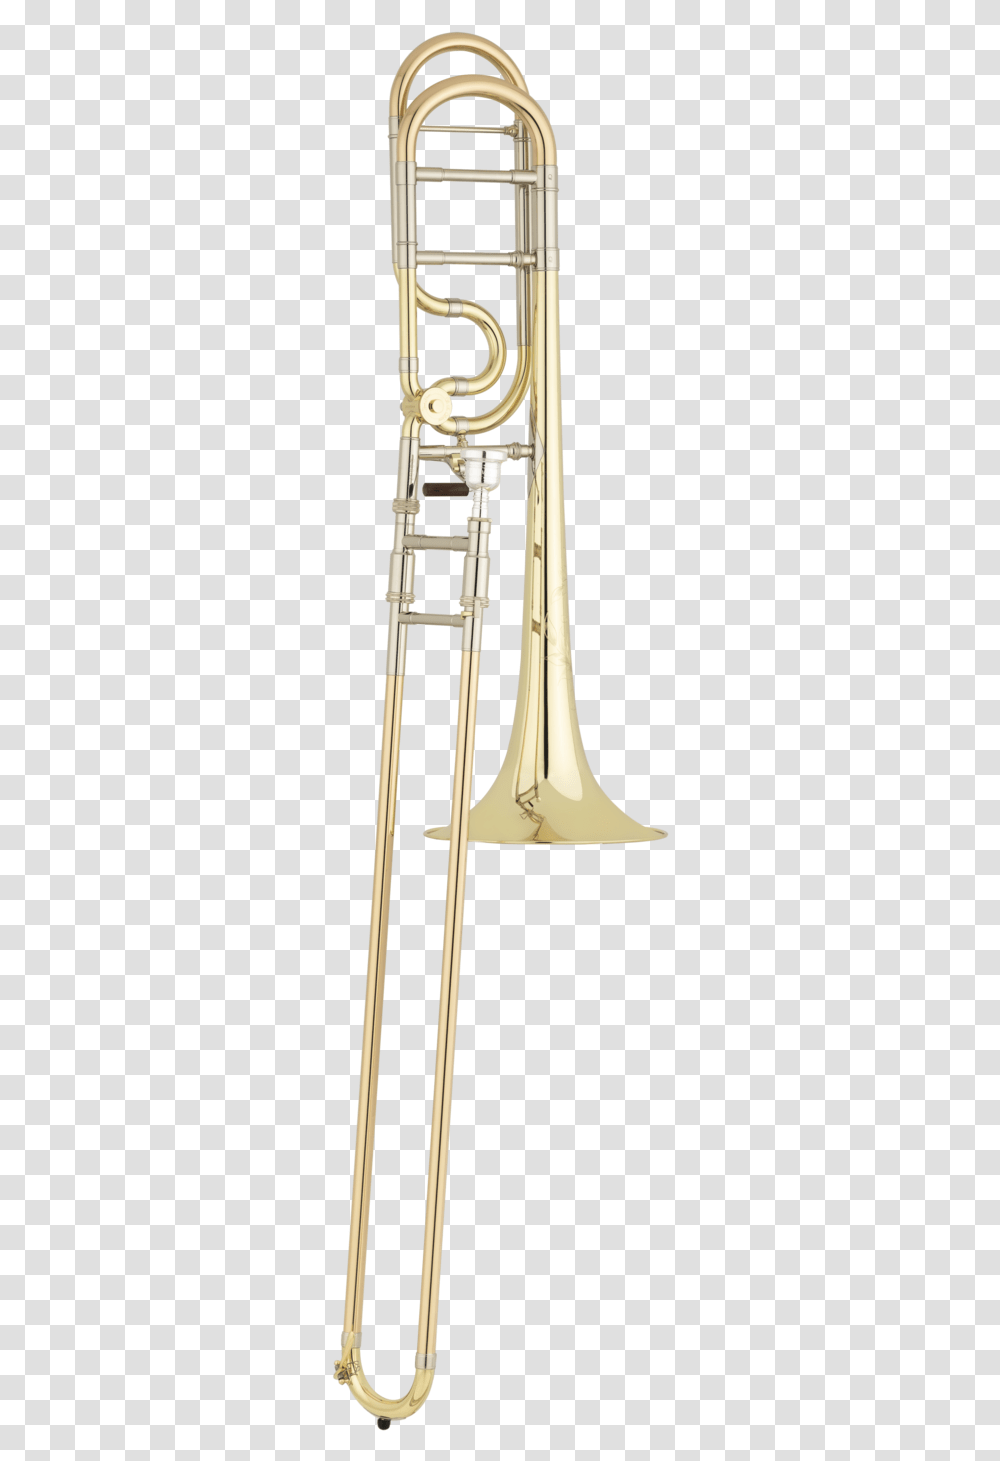 Shires Trombone Tbqalessi Front 1119 Joseph Alessi Shires Trombone, Brass Section, Musical Instrument Transparent Png